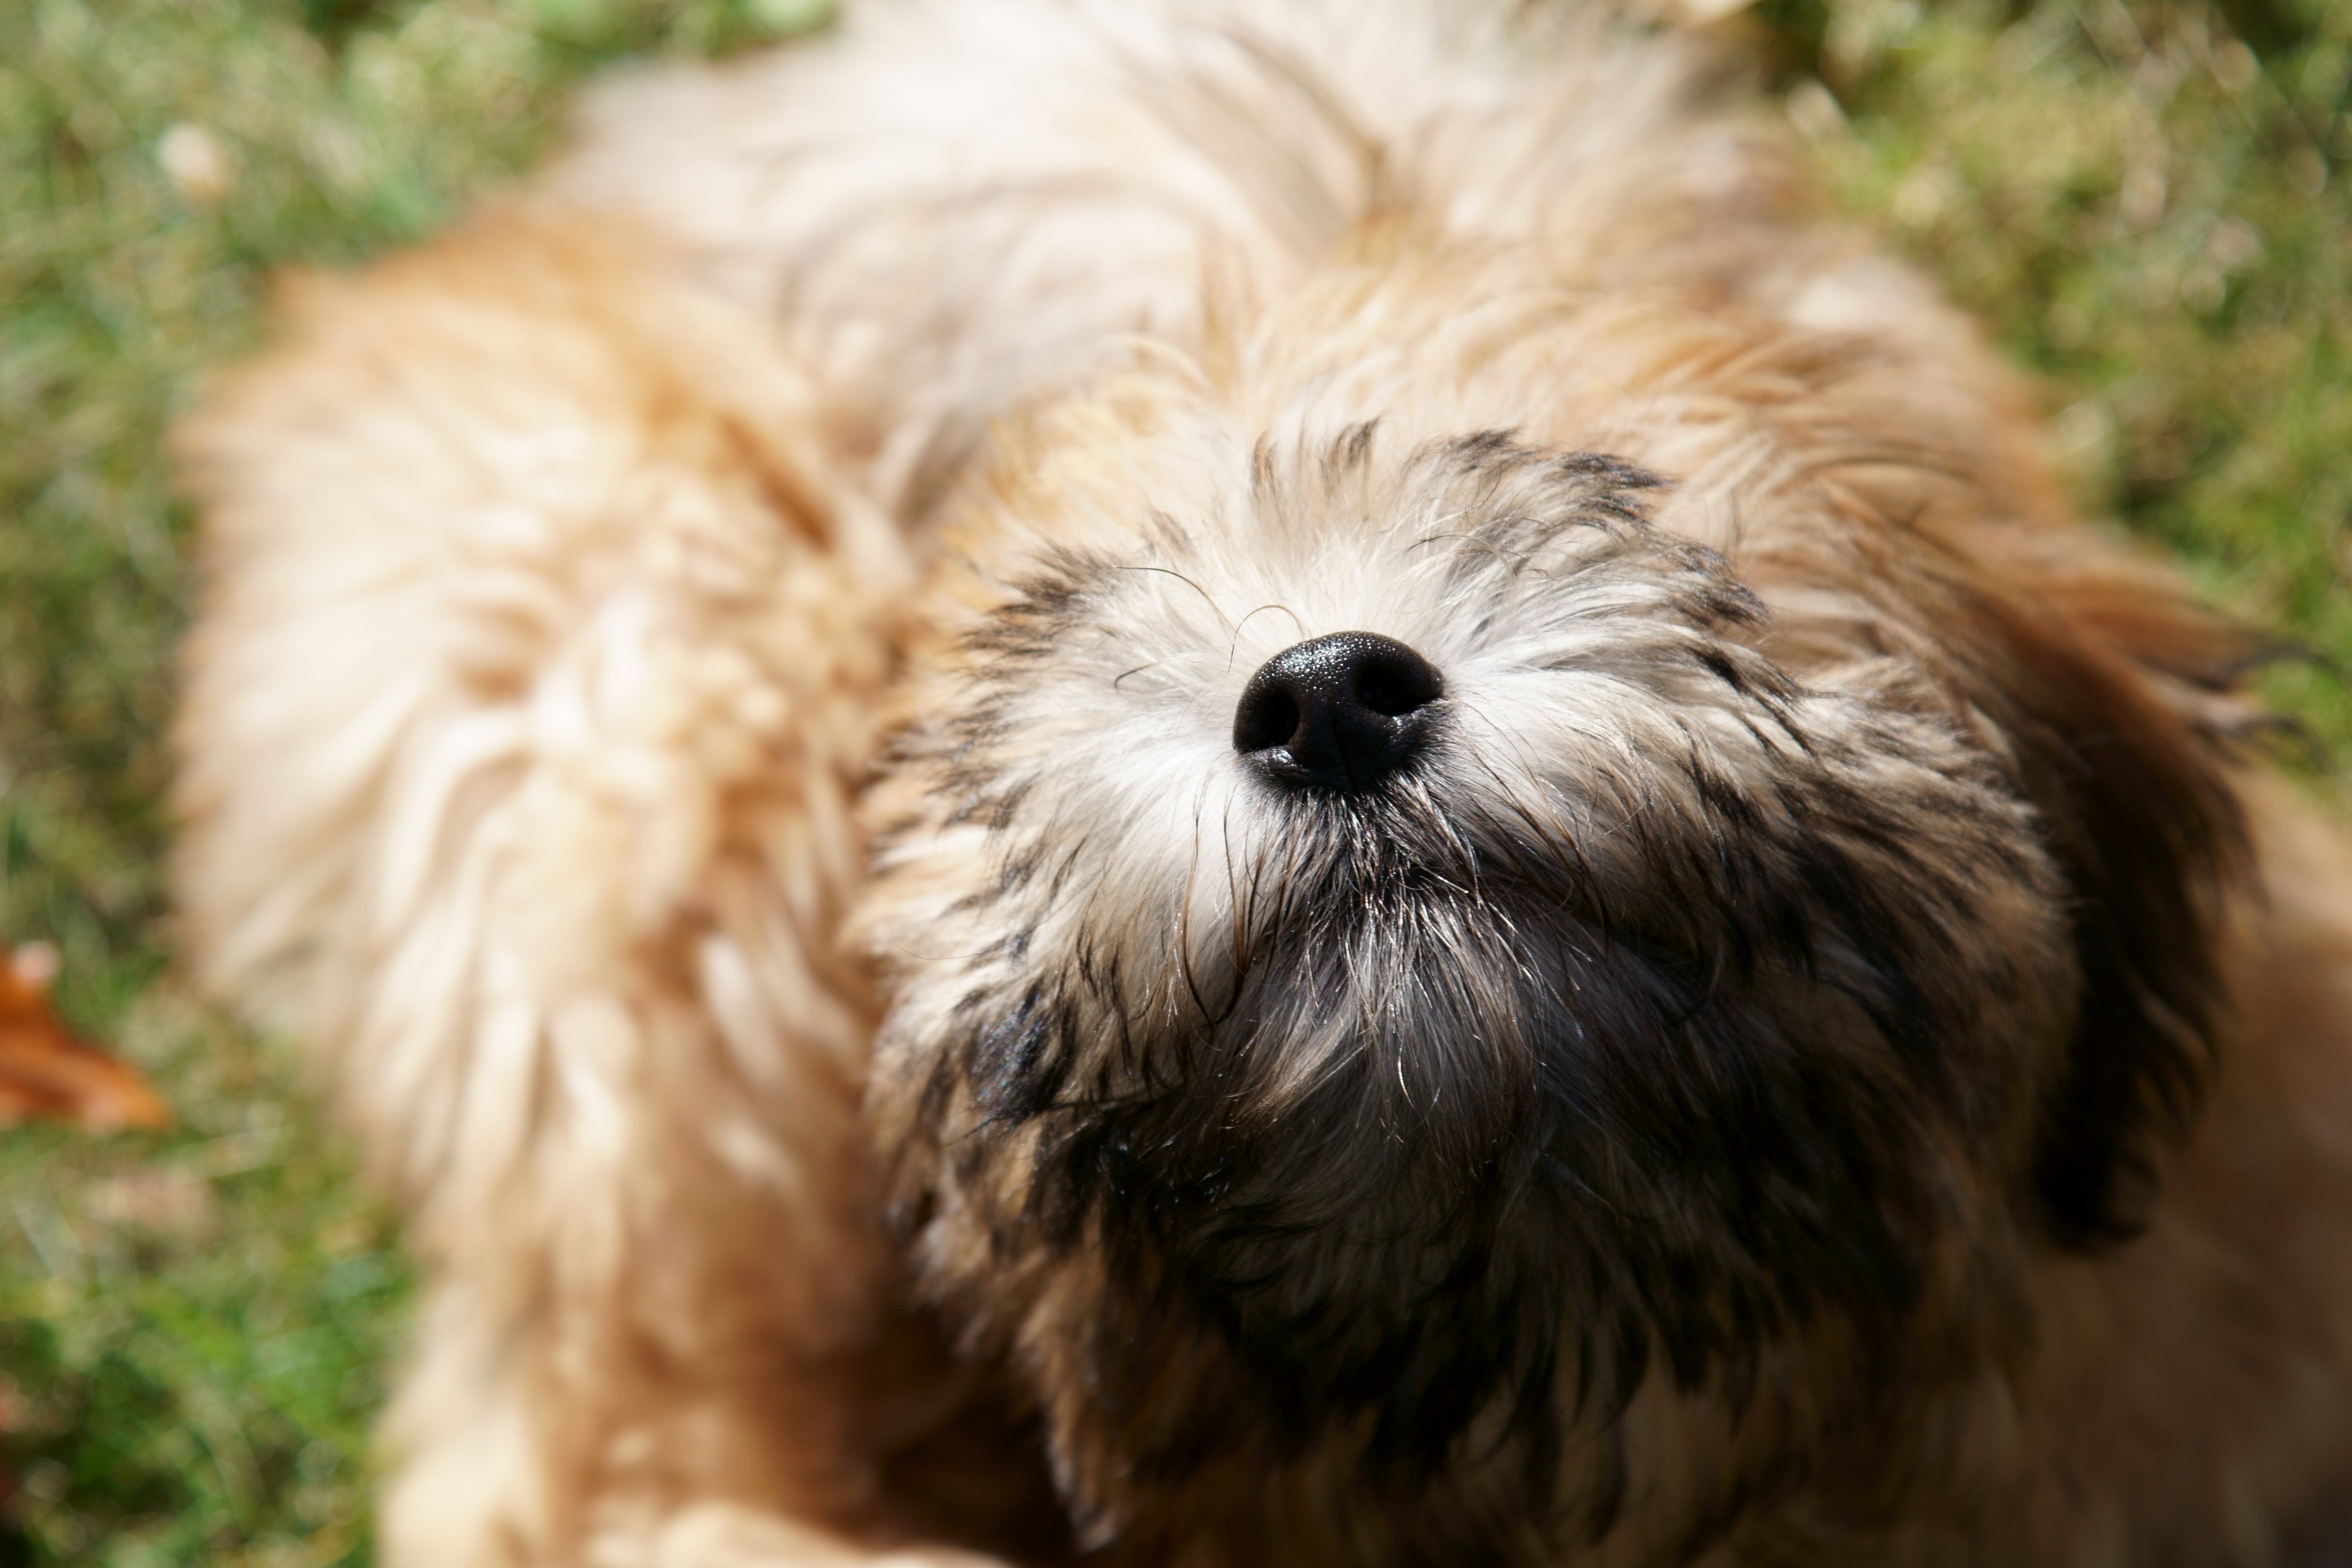 A pure bred Wheaten Terrier puppy dog in a playful mood.